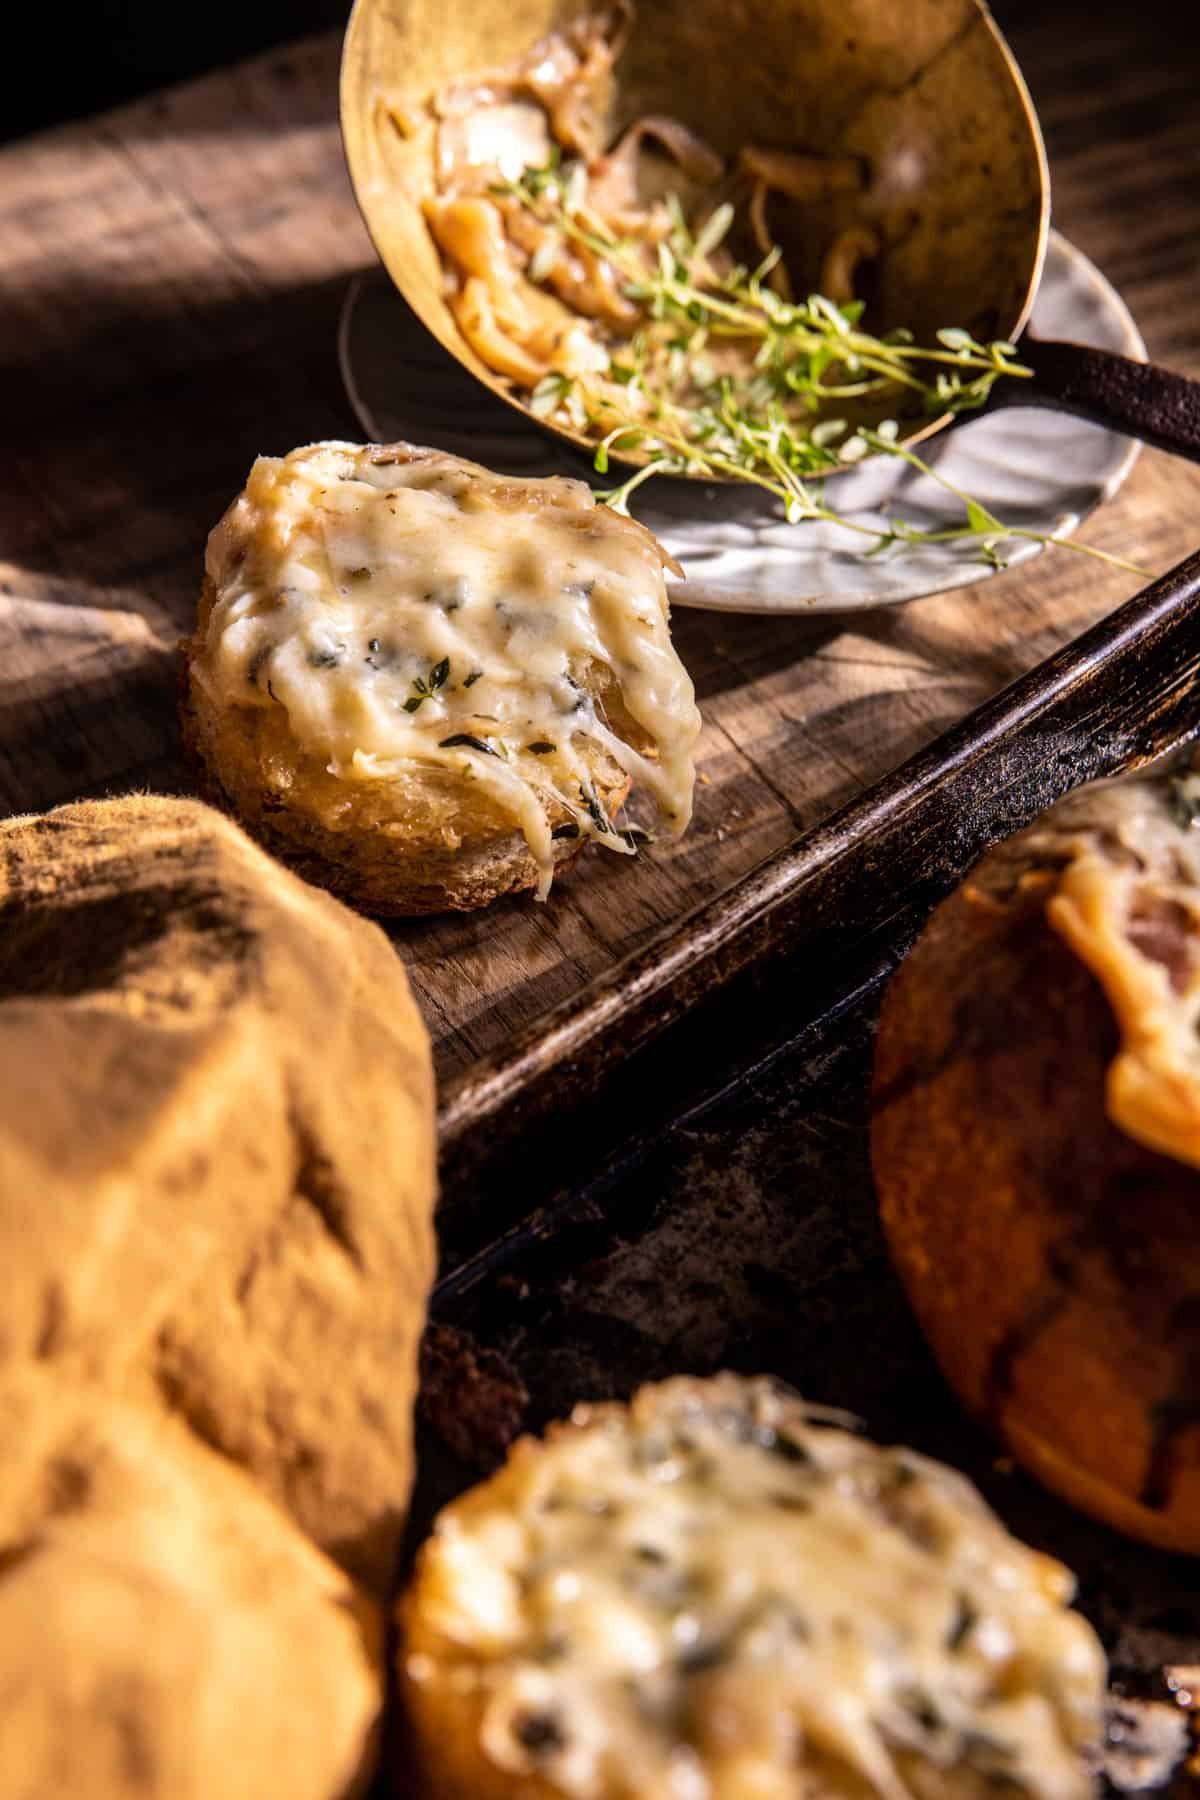 Creamy French Onion Soup Baked In Bread Bowls | halfbakedharvest.com